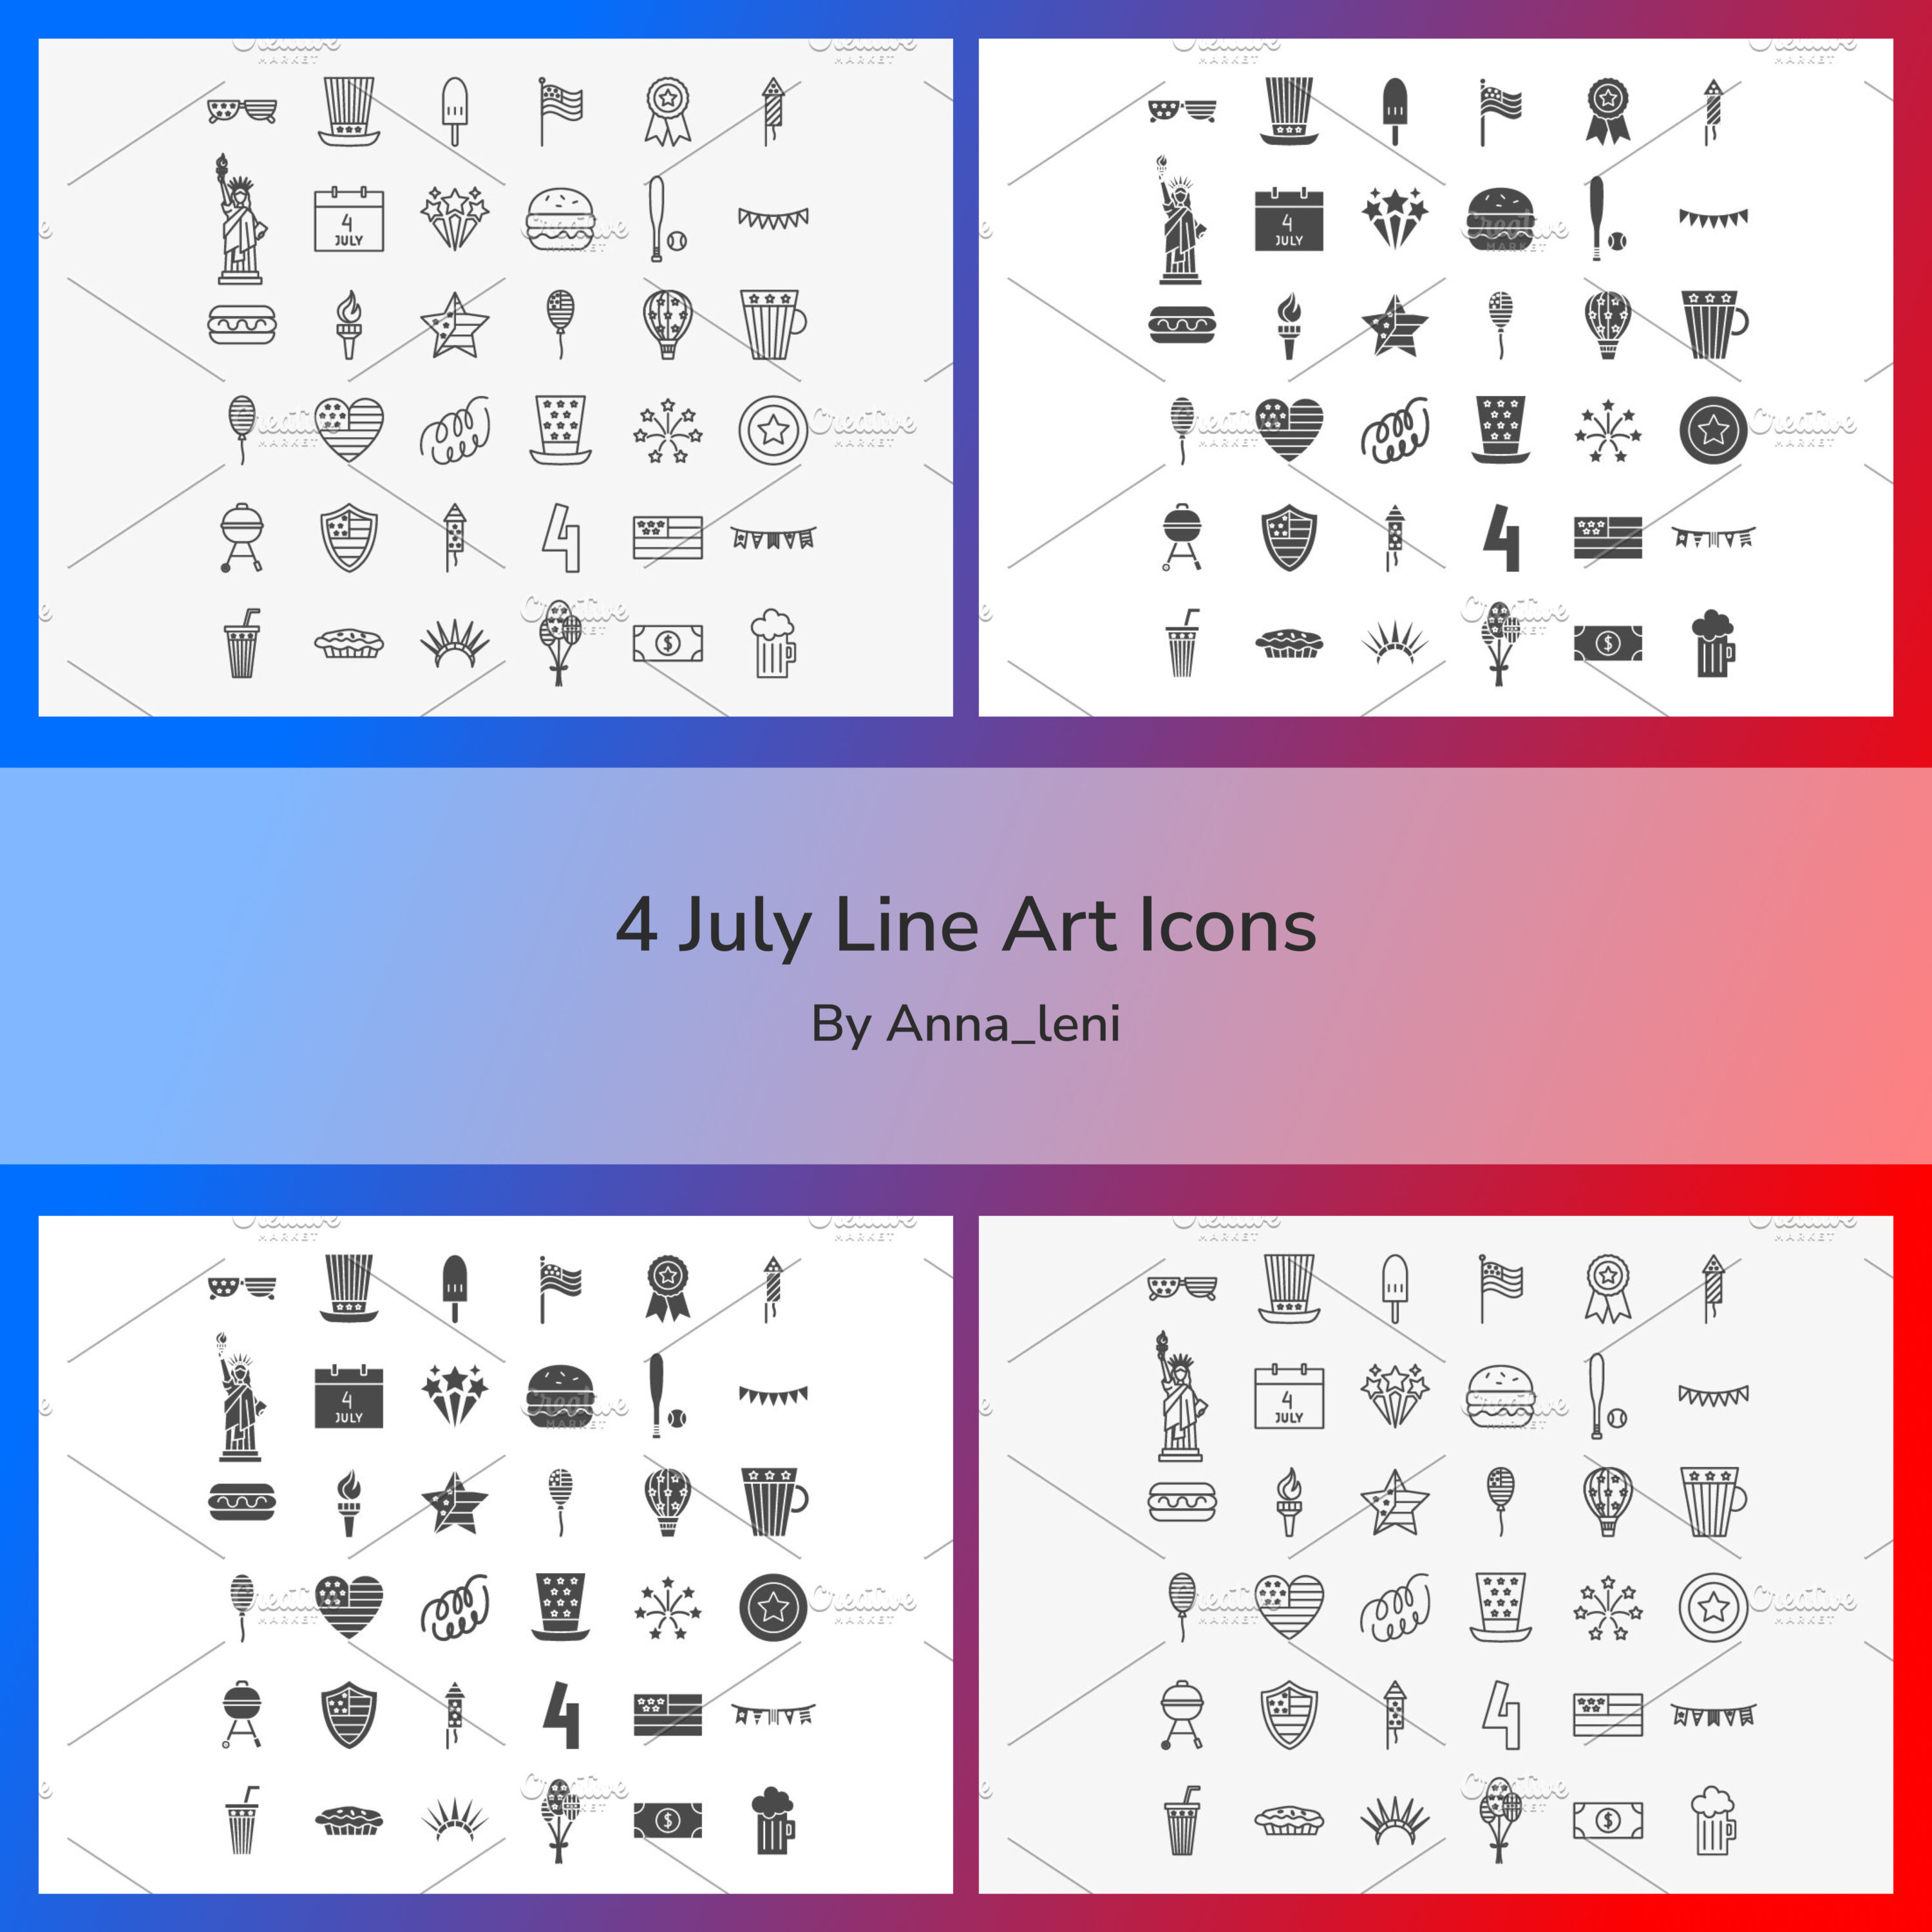 Prints of 4 july line art icons.